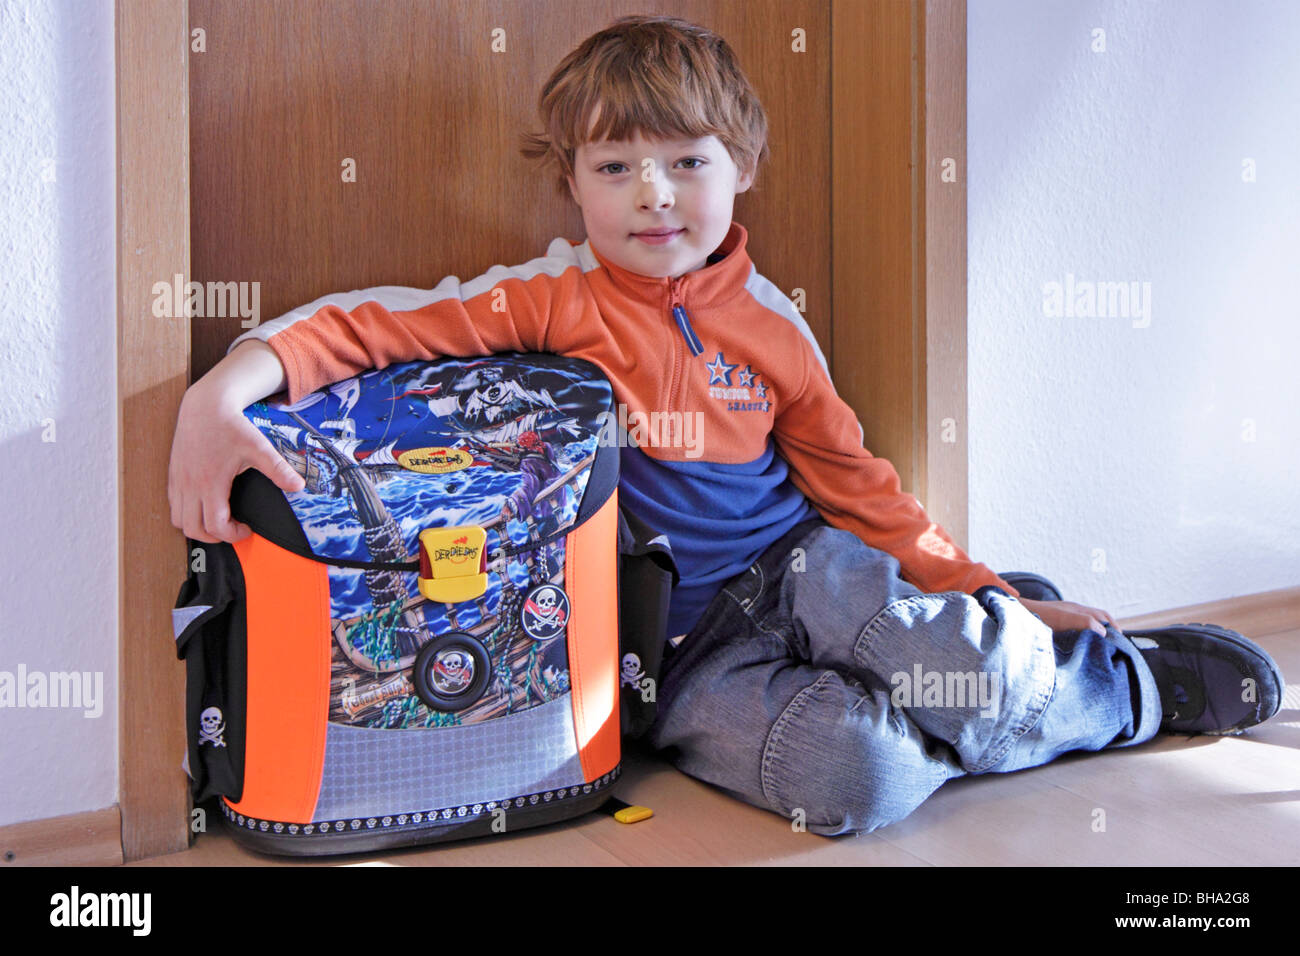 portrait of a young boy with his schoolbag Stock Photo